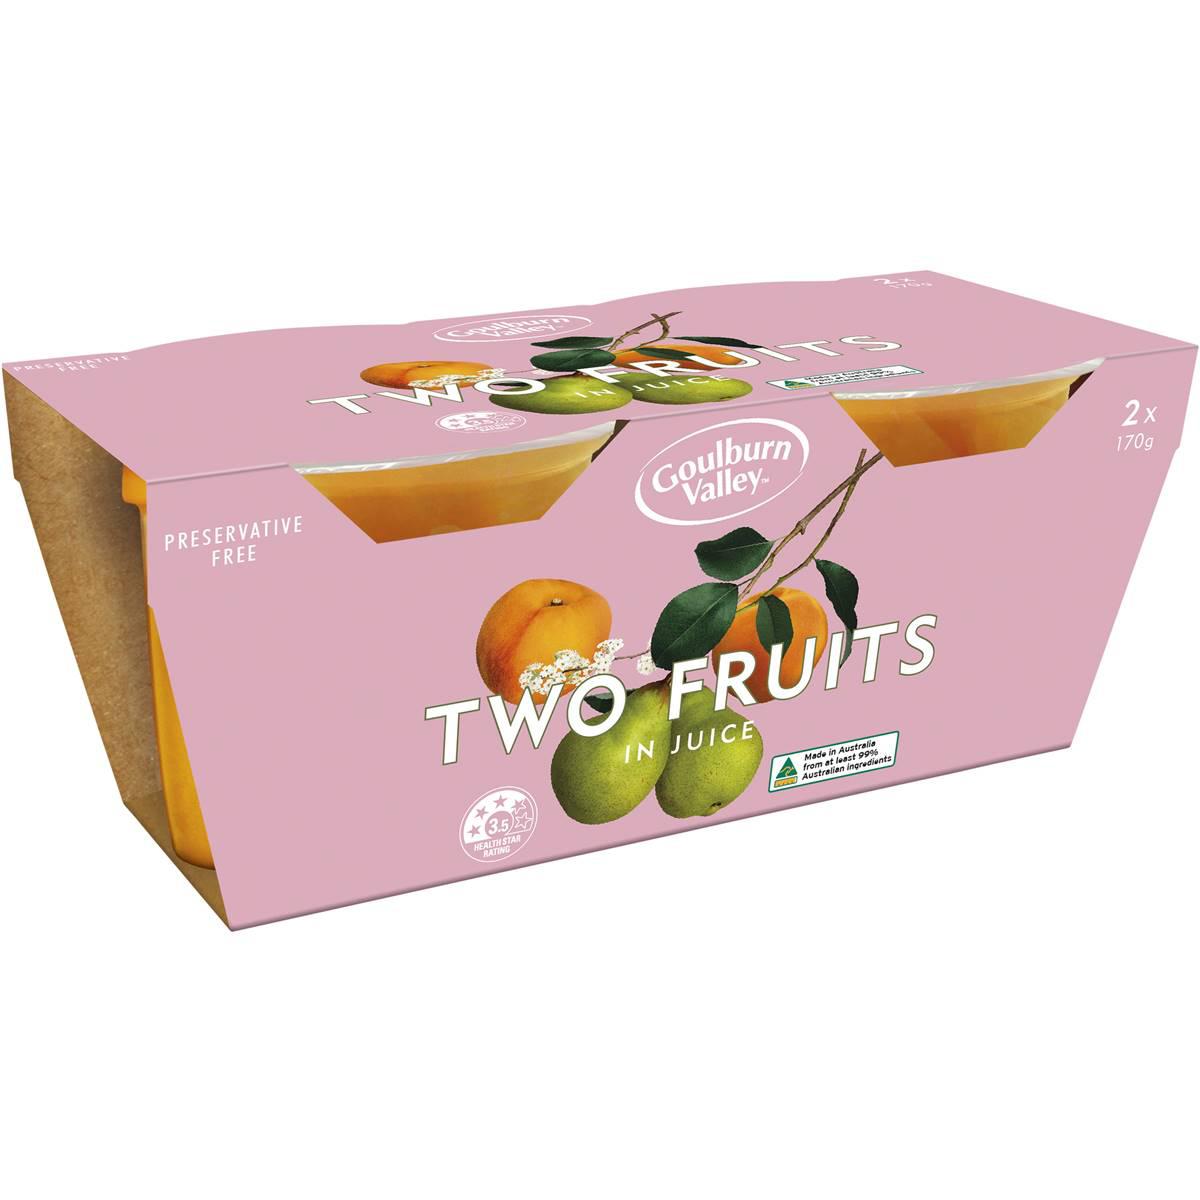 Goulburn Valley Two Fruits In Juice Fruit Cups 2x170g